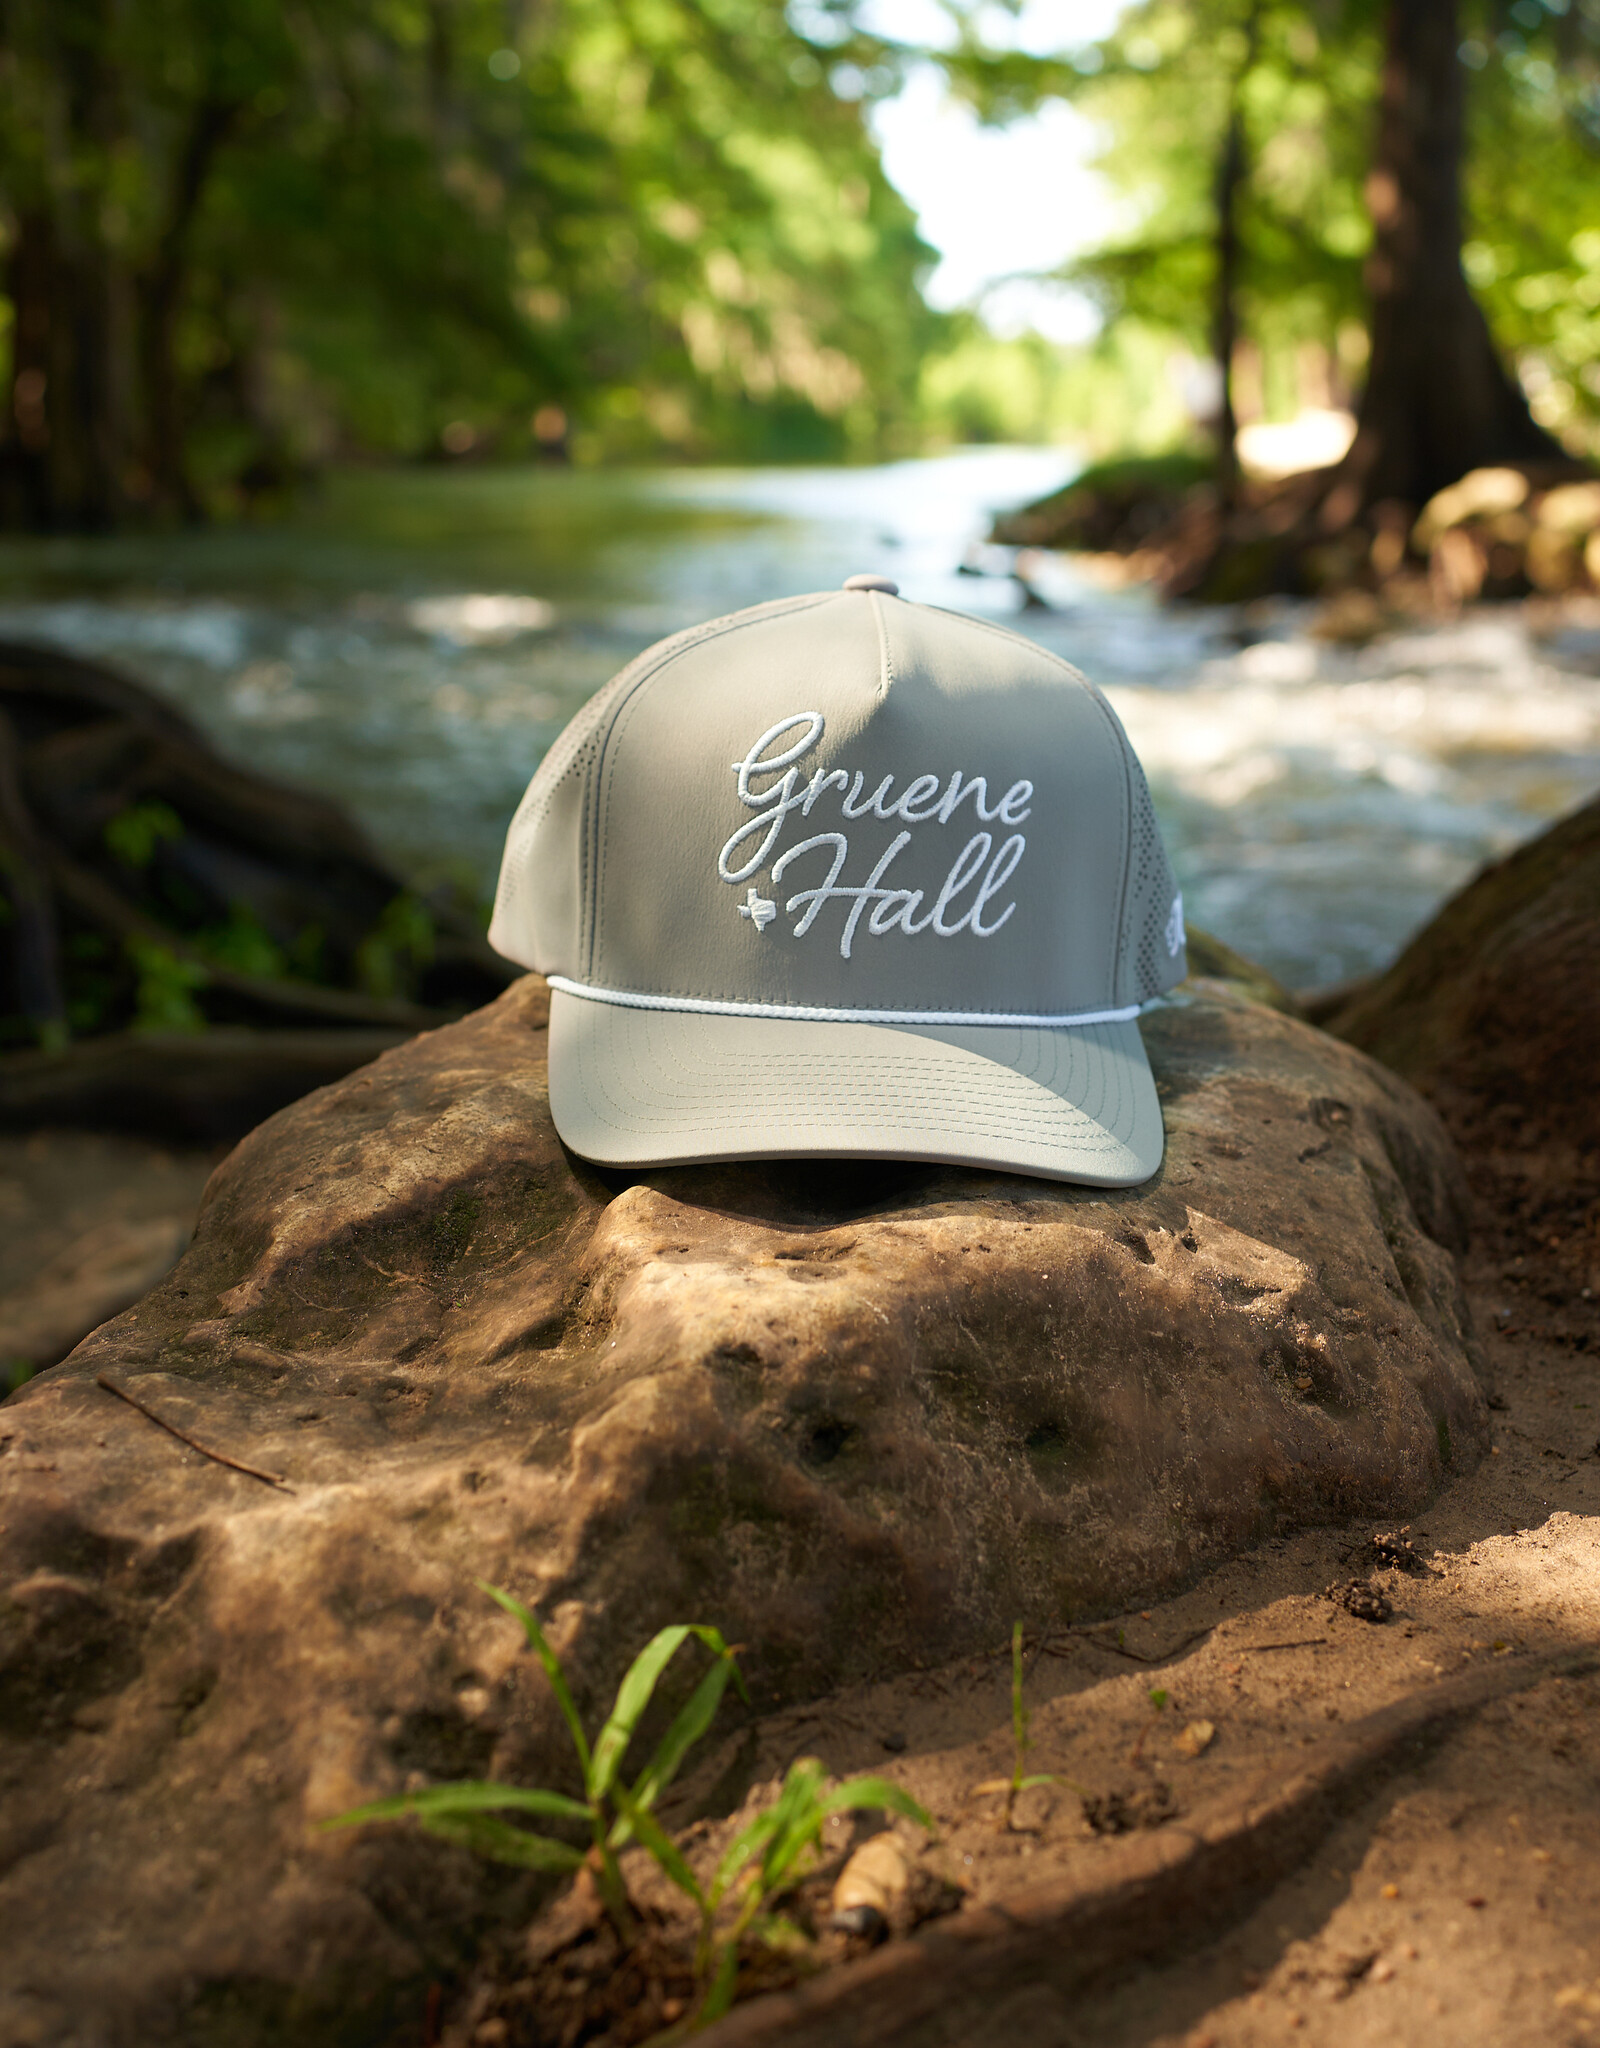 Gruene Hall Stitched Fabric Back Cap by Hooey